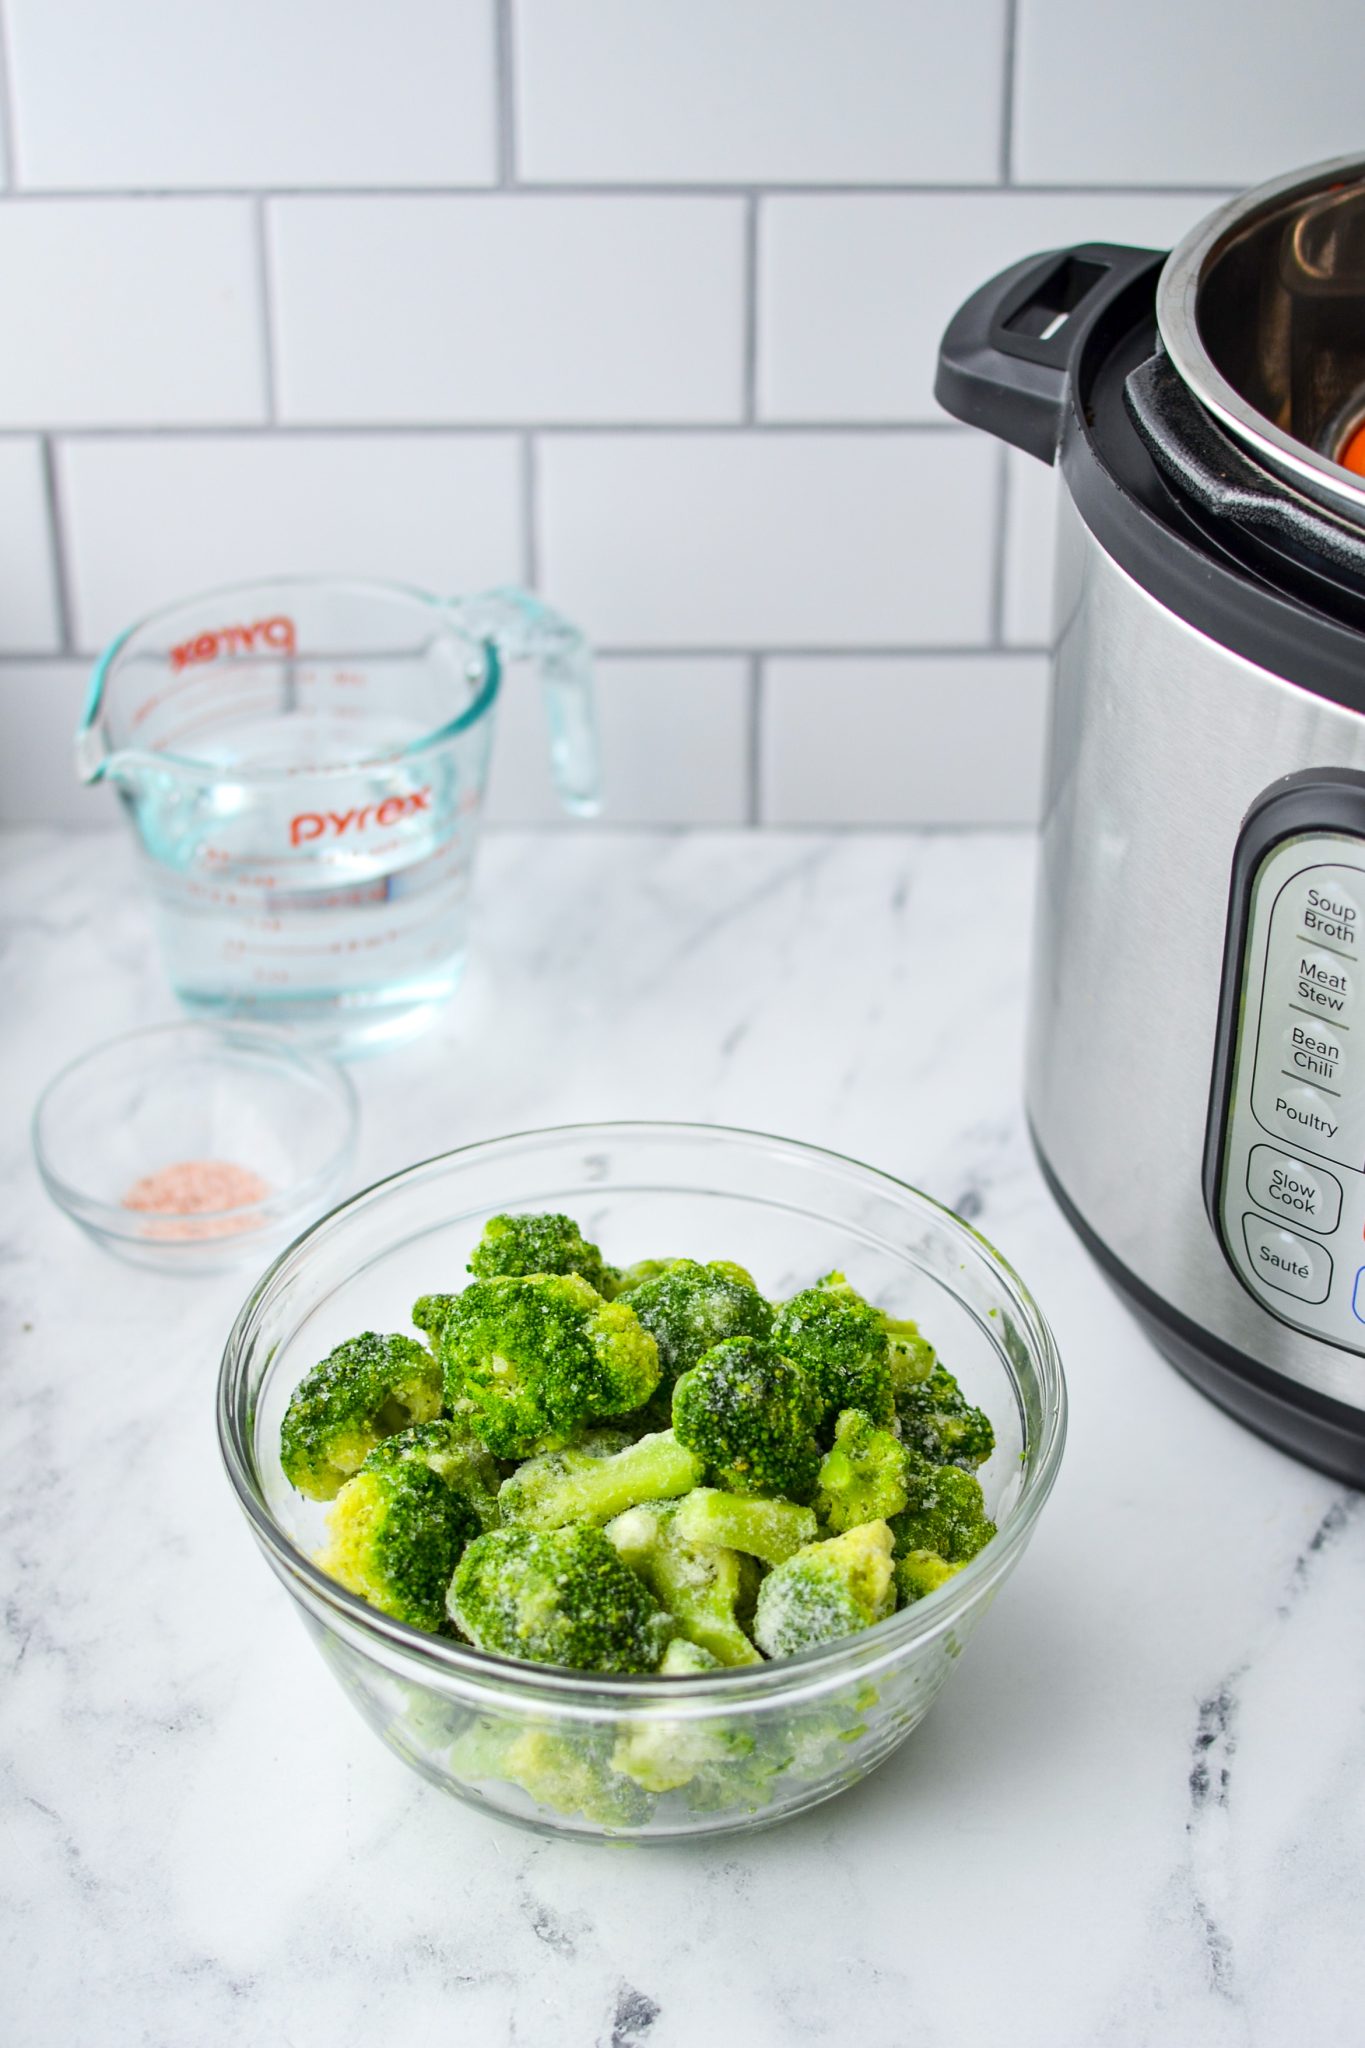 A bowl of frozen broccoli on a white marble countertop. A measuring cup of water, some salt, and an Instant Pot in the background.